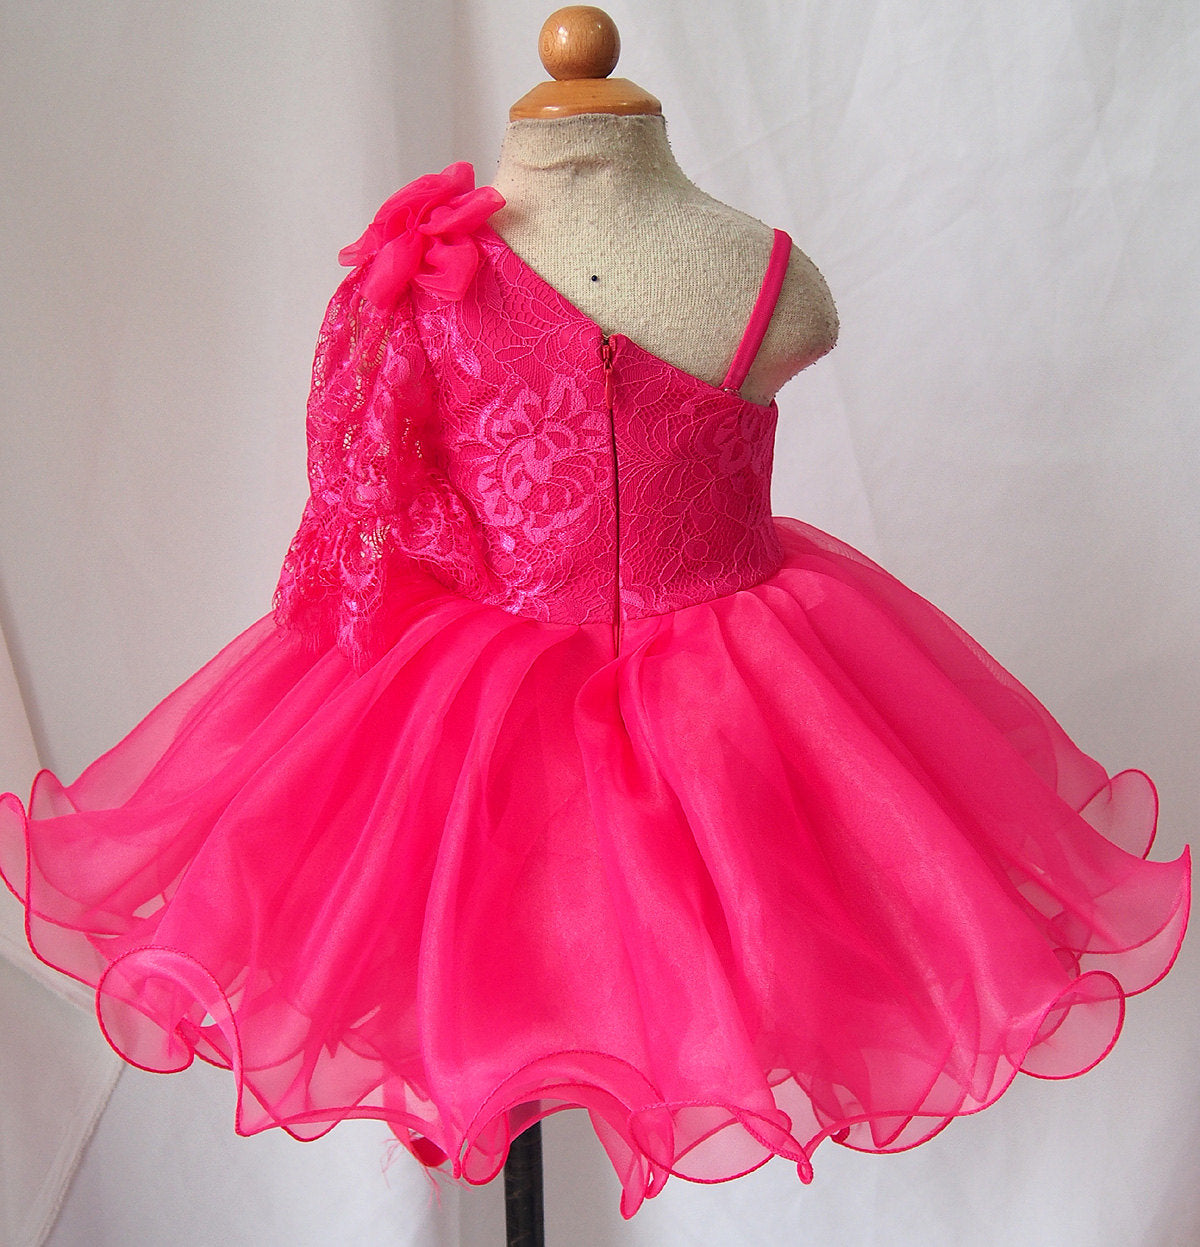 Natural Infant/toddler/baby/children/kids doll style Girl's Pageant Dress - ToddlerPageantDress